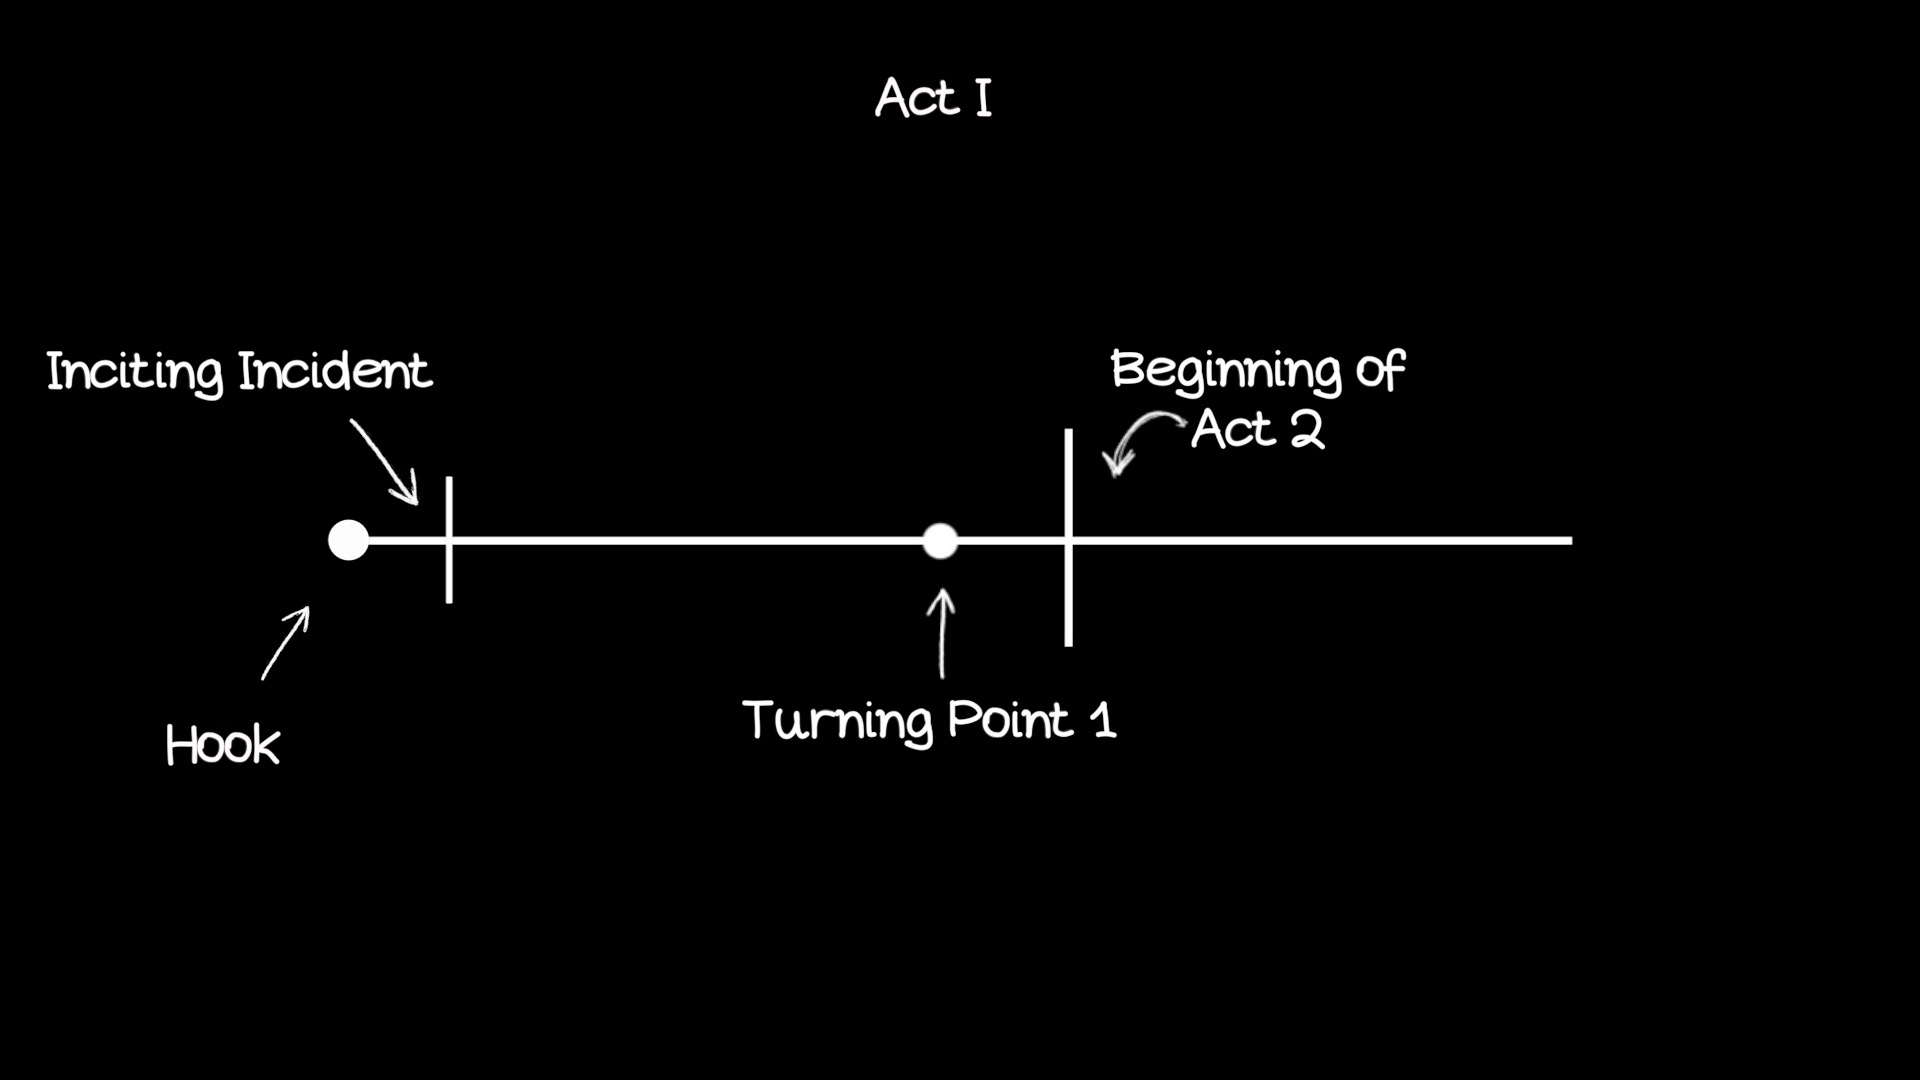 In Act 1, there are 3 to 4 important plot points (or turning points).